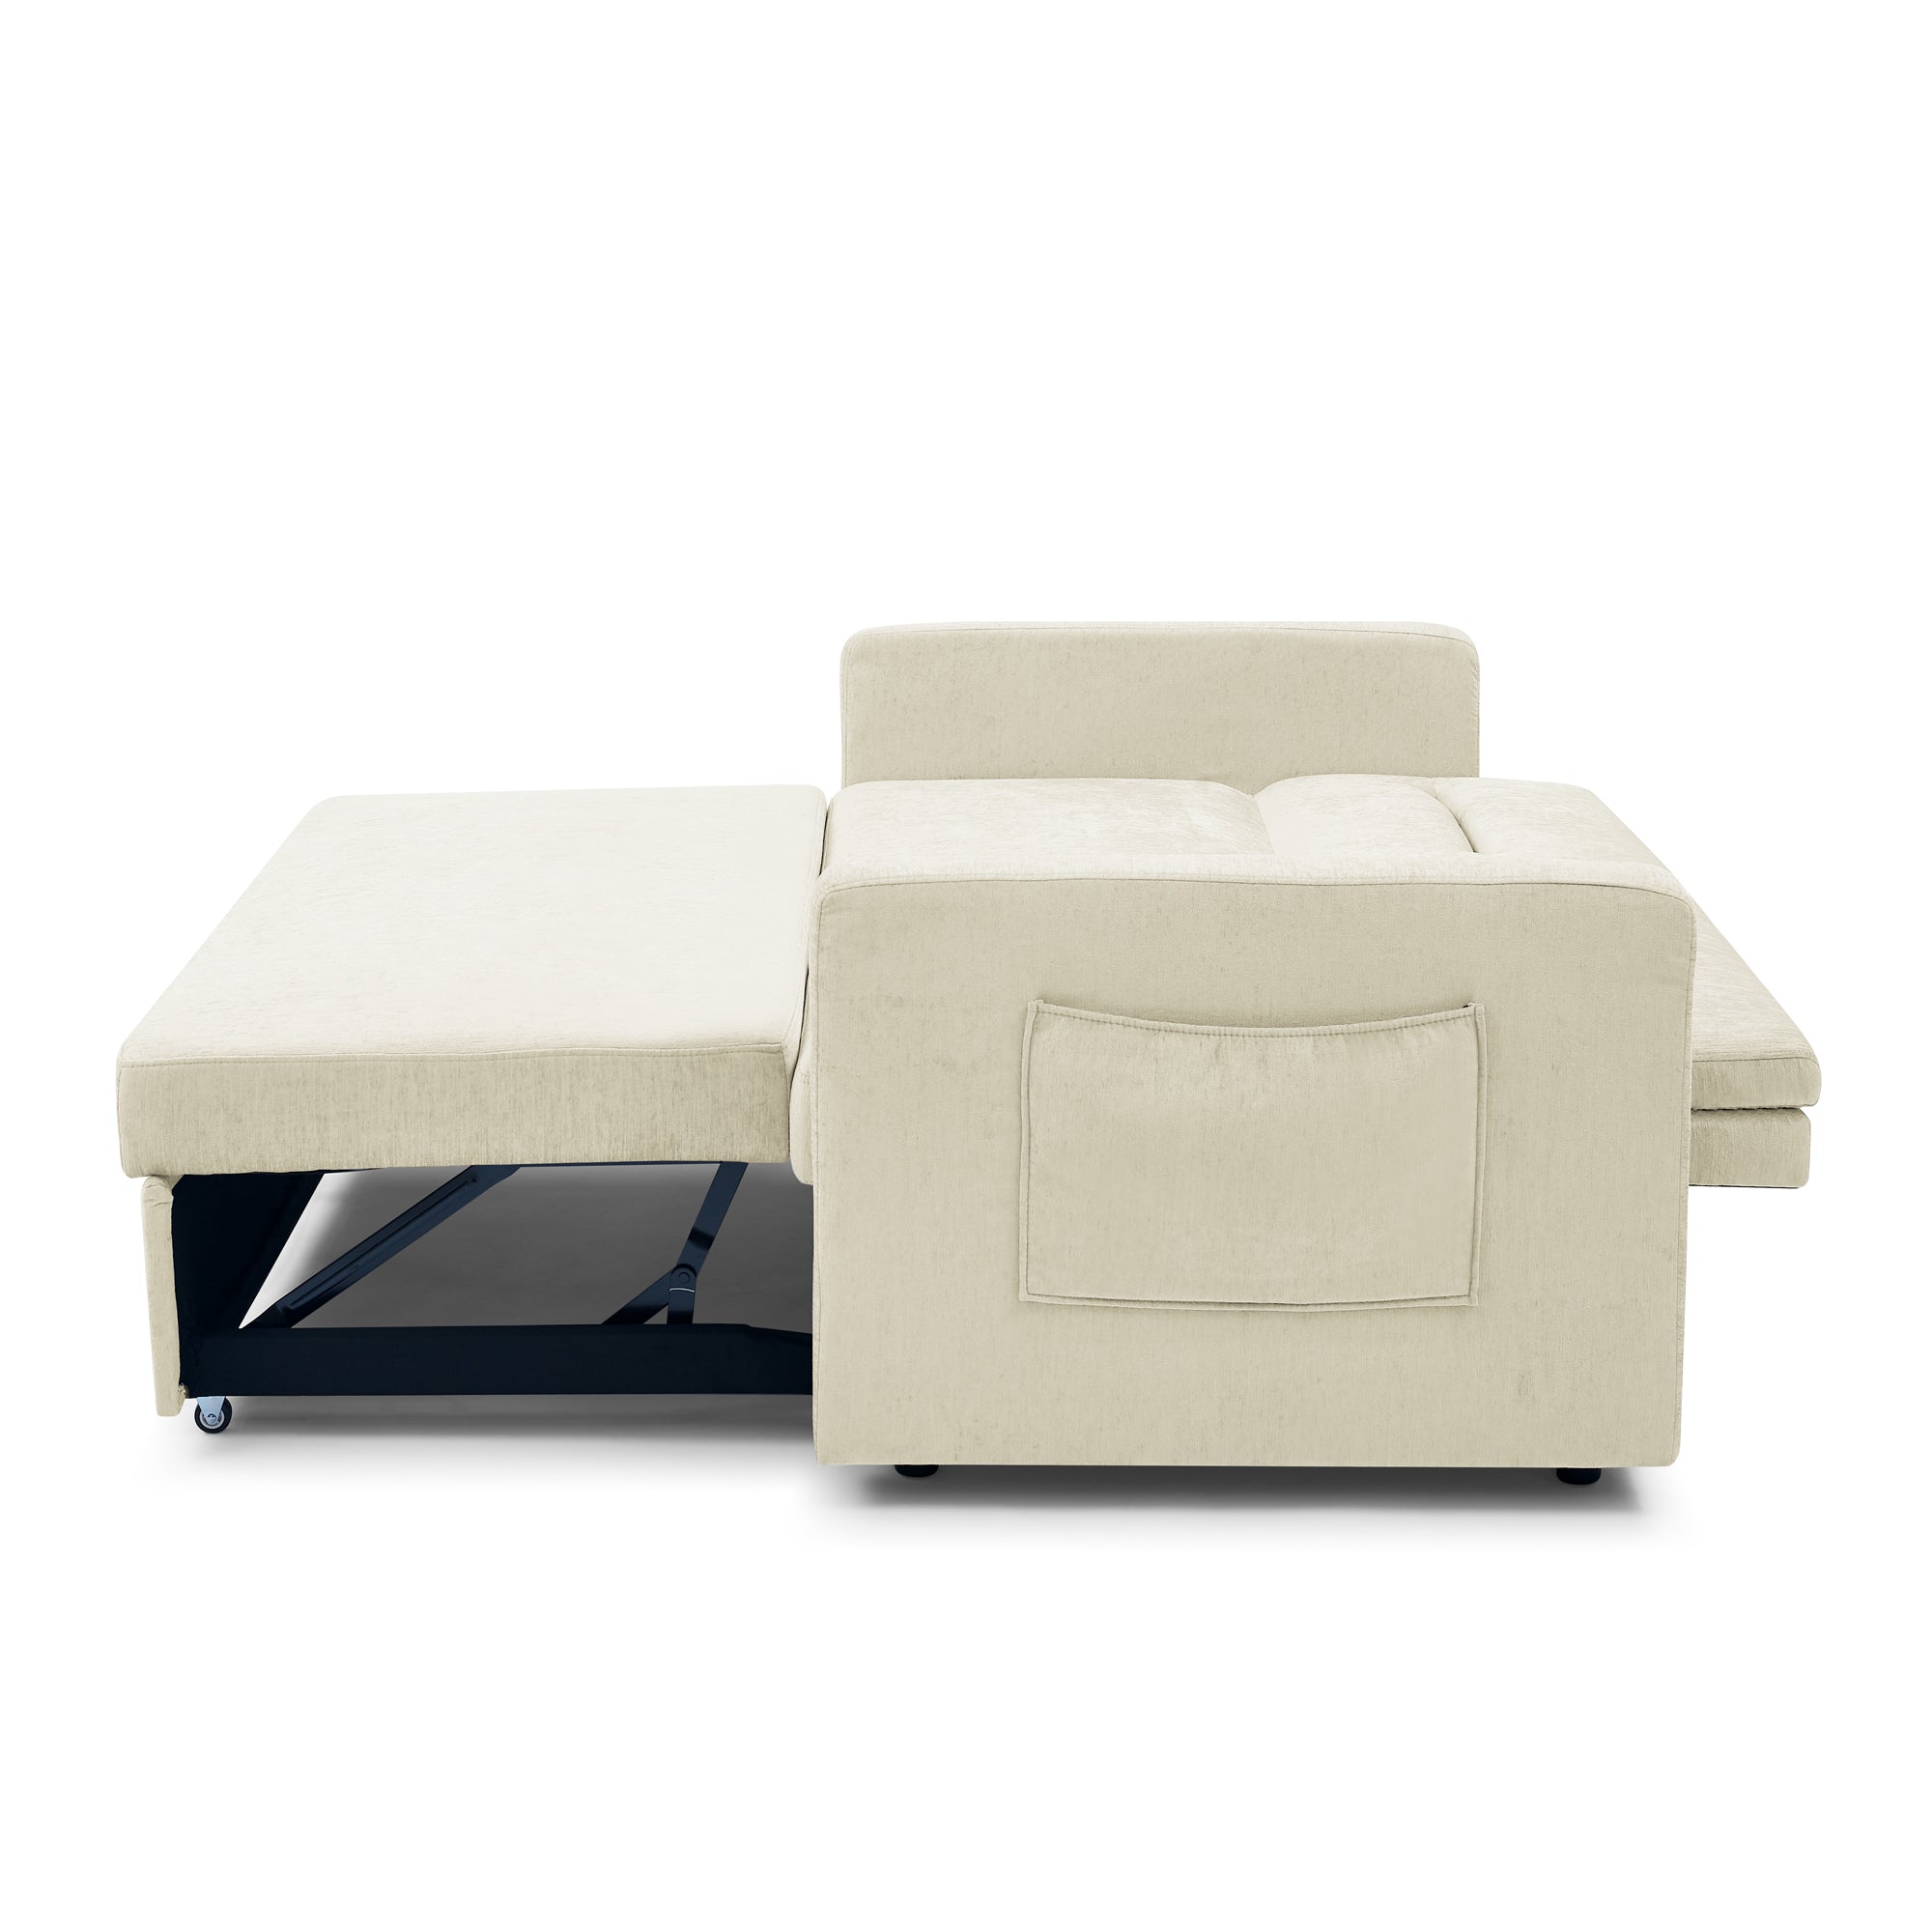 Convertible Loveseats Sofa Bed with Pull-out Bed, Adjustable Back and 2 Bag Pockets, Beige